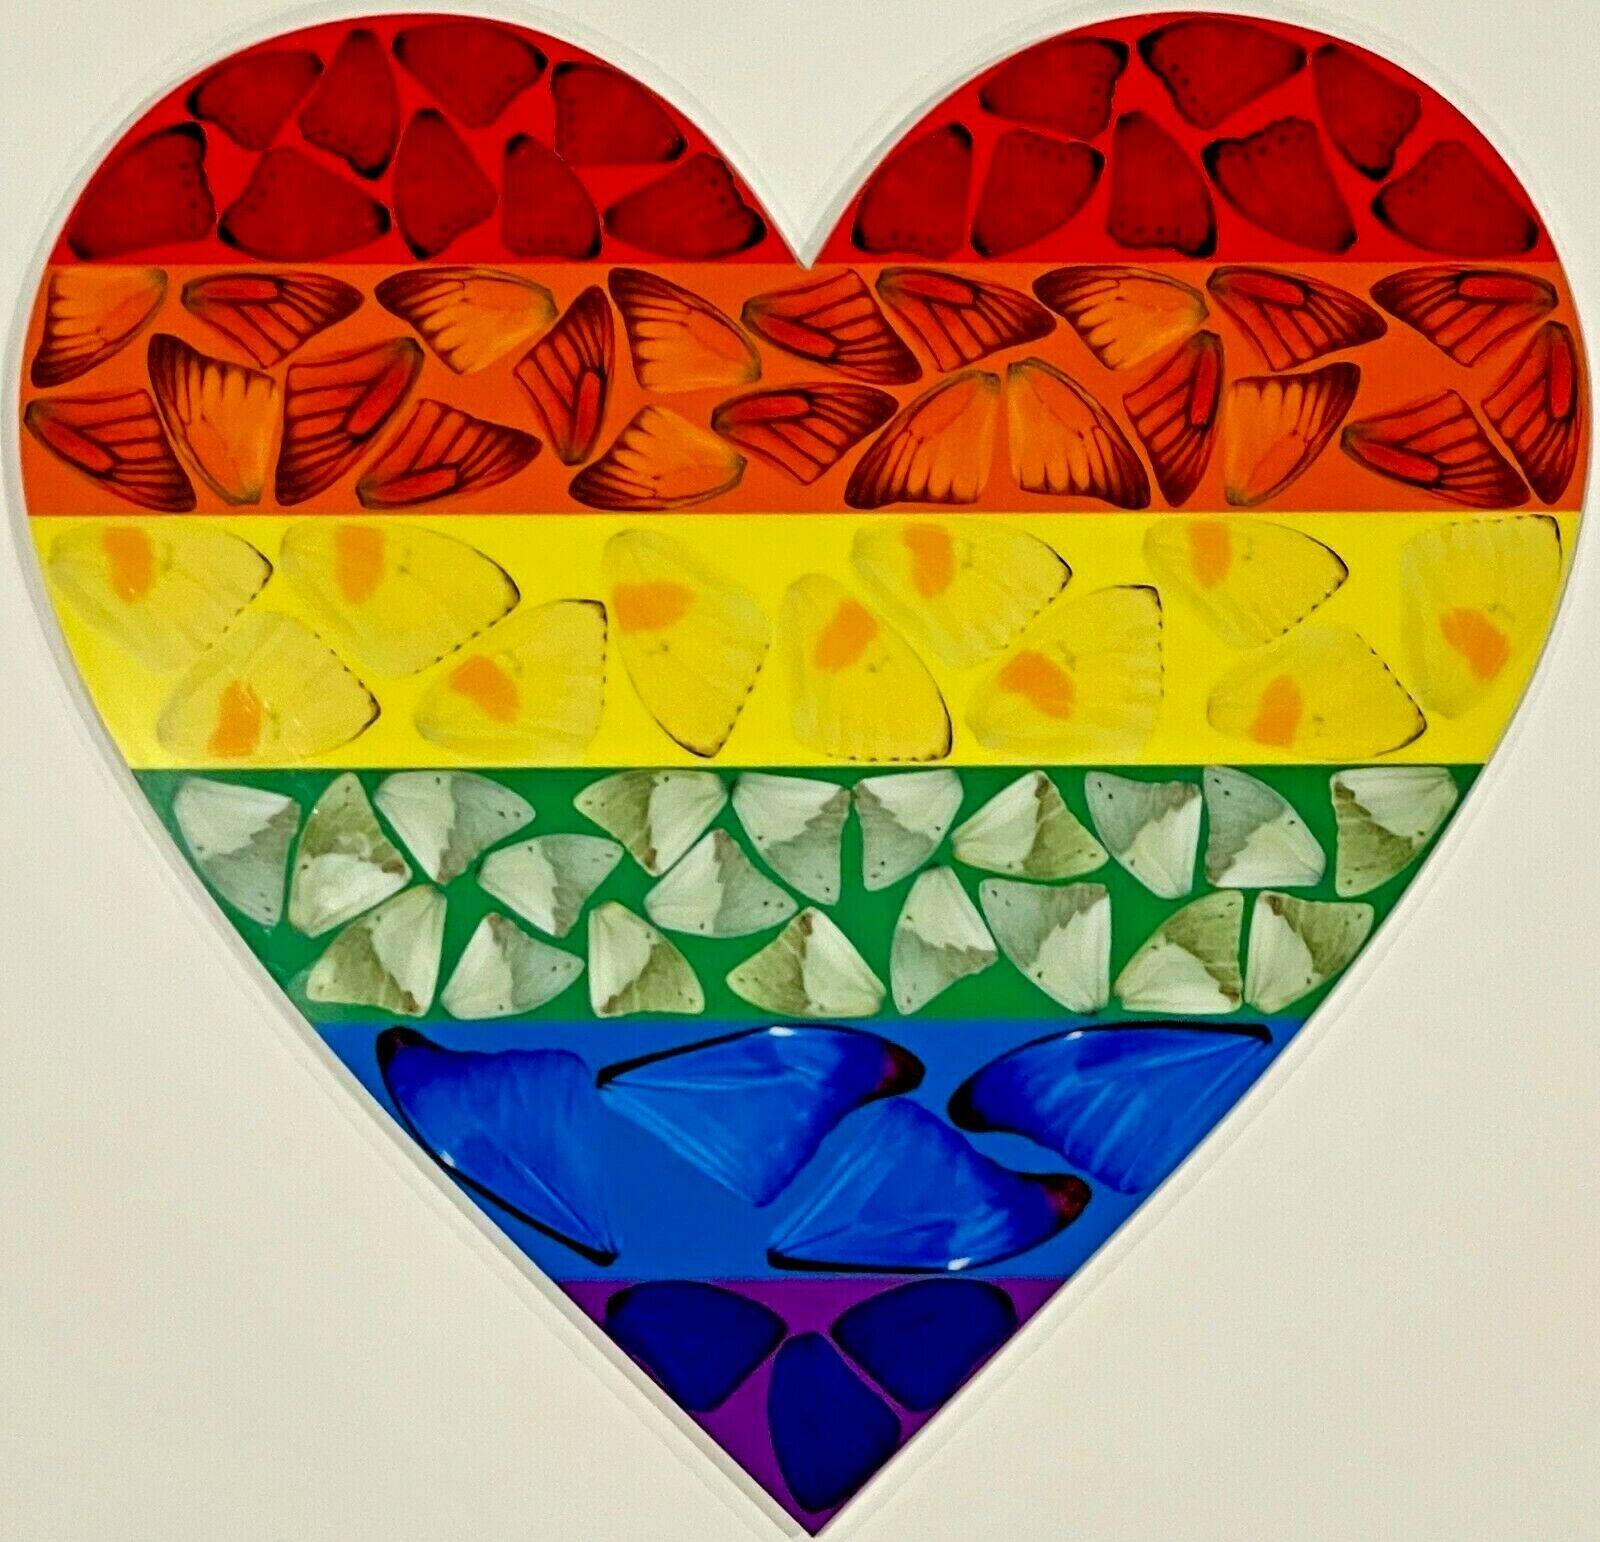 Damien Hirst, Rainbow Heart, Small Laminated Giclee Print on Aluminium, 2020

Laminated Giclée print on aluminium composite panel.
From a limited edition of 3510
Excellent, 'as new' / unused condition. Sold in original protective shipping casing /